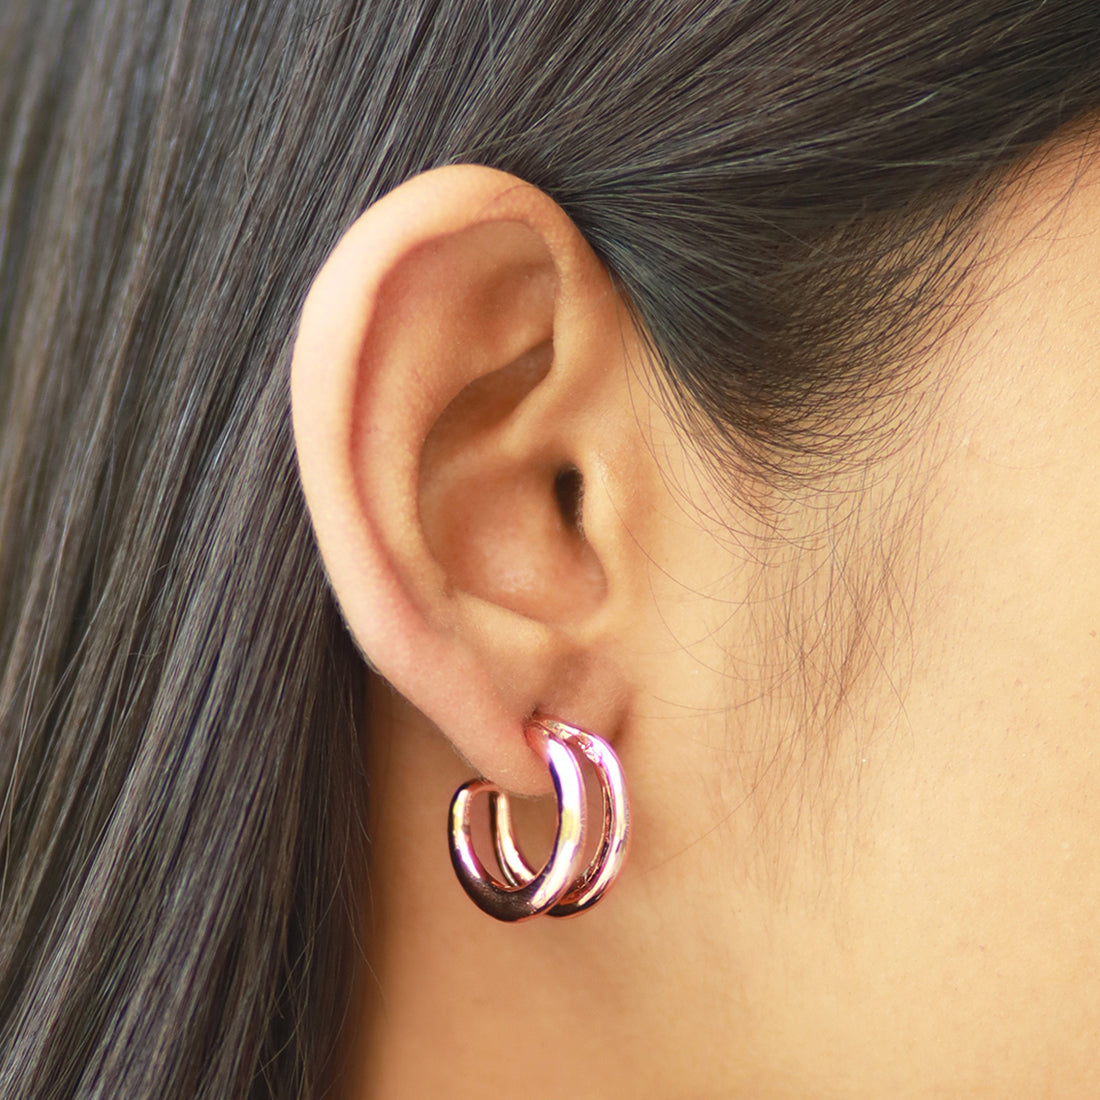 CONTEMPORARY BOLD ROSE GOLD-TONED DOUBLE-LAYERED MINI OPEN-HOOP EARRINGS